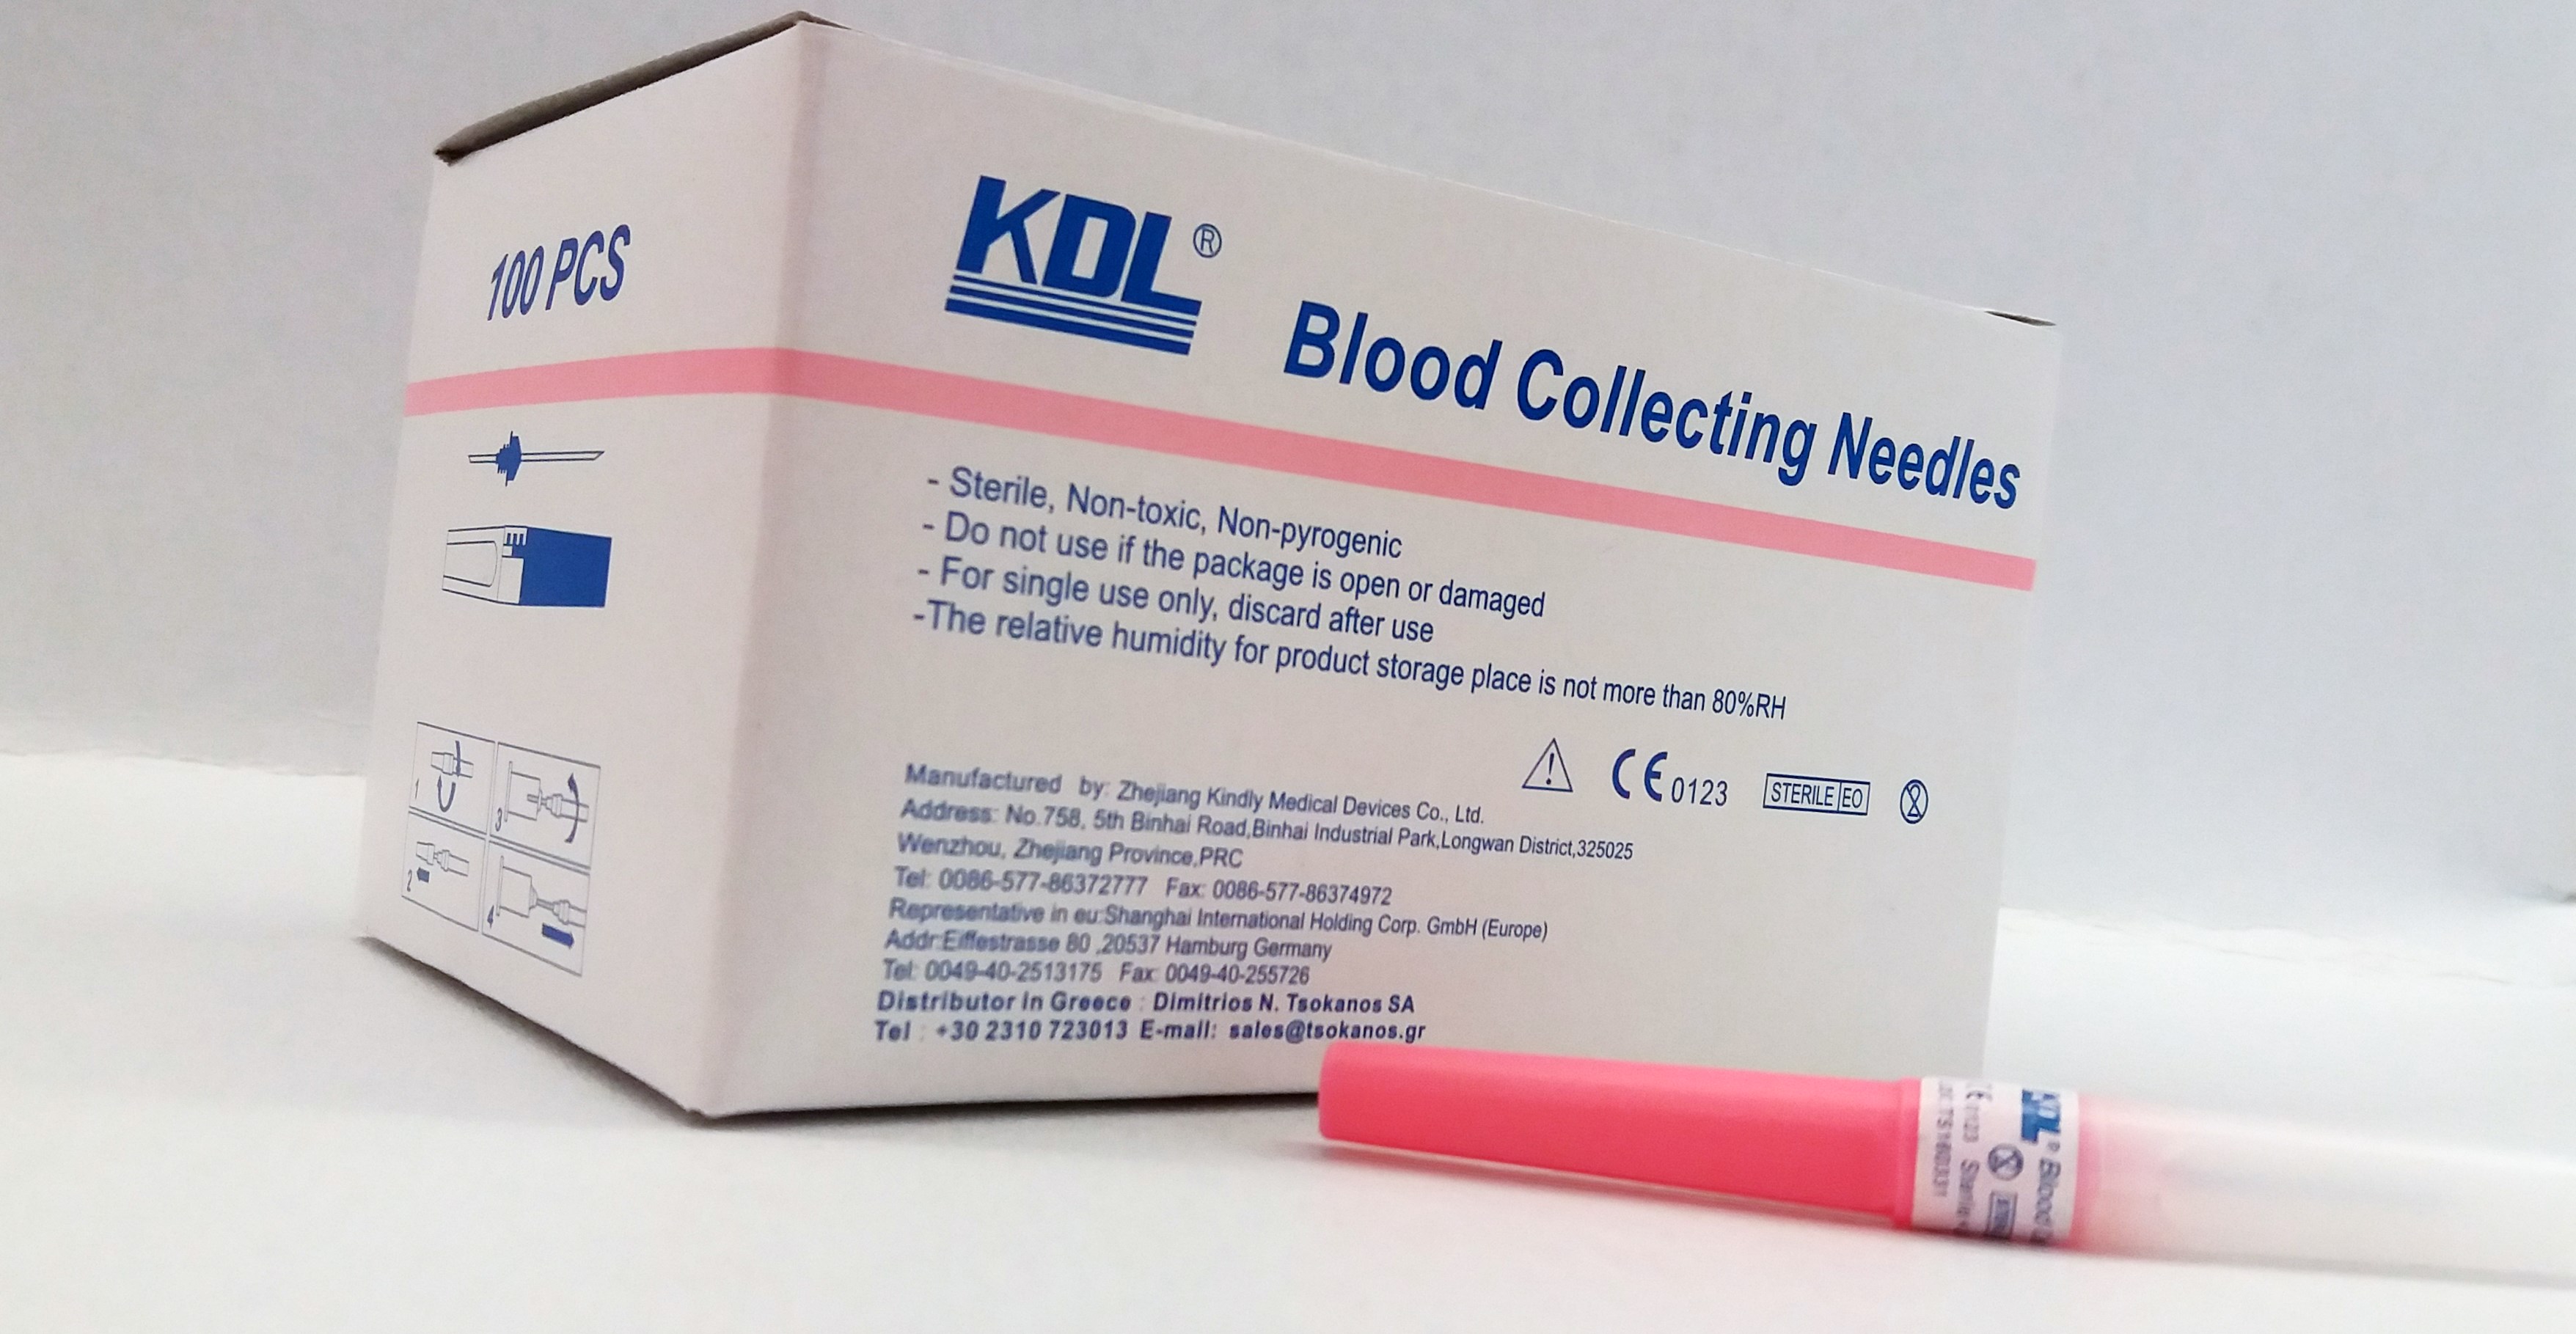 Blood collection needles KDL 18G x 1 1/2"